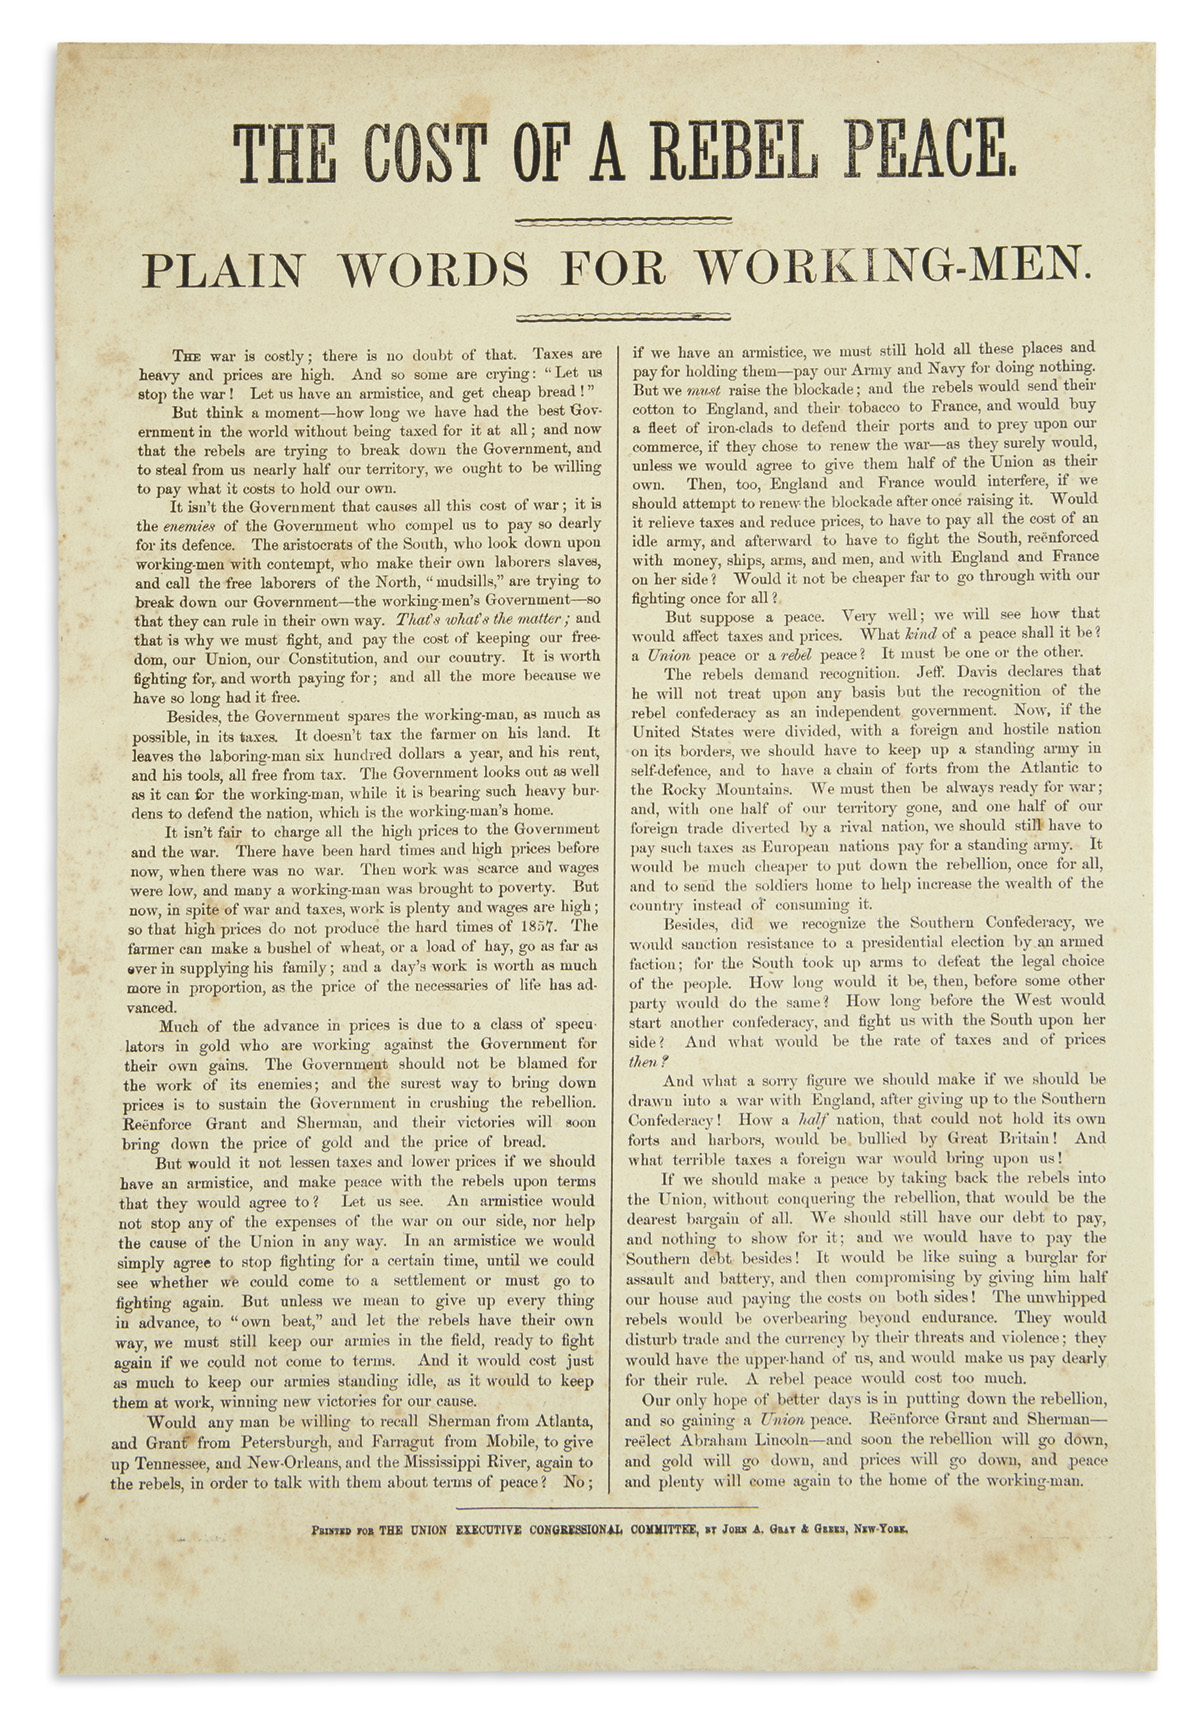 (CIVIL WAR--BROADSIDES.) The Cost of a Rebel Peace: Plain Words for Working-Men.